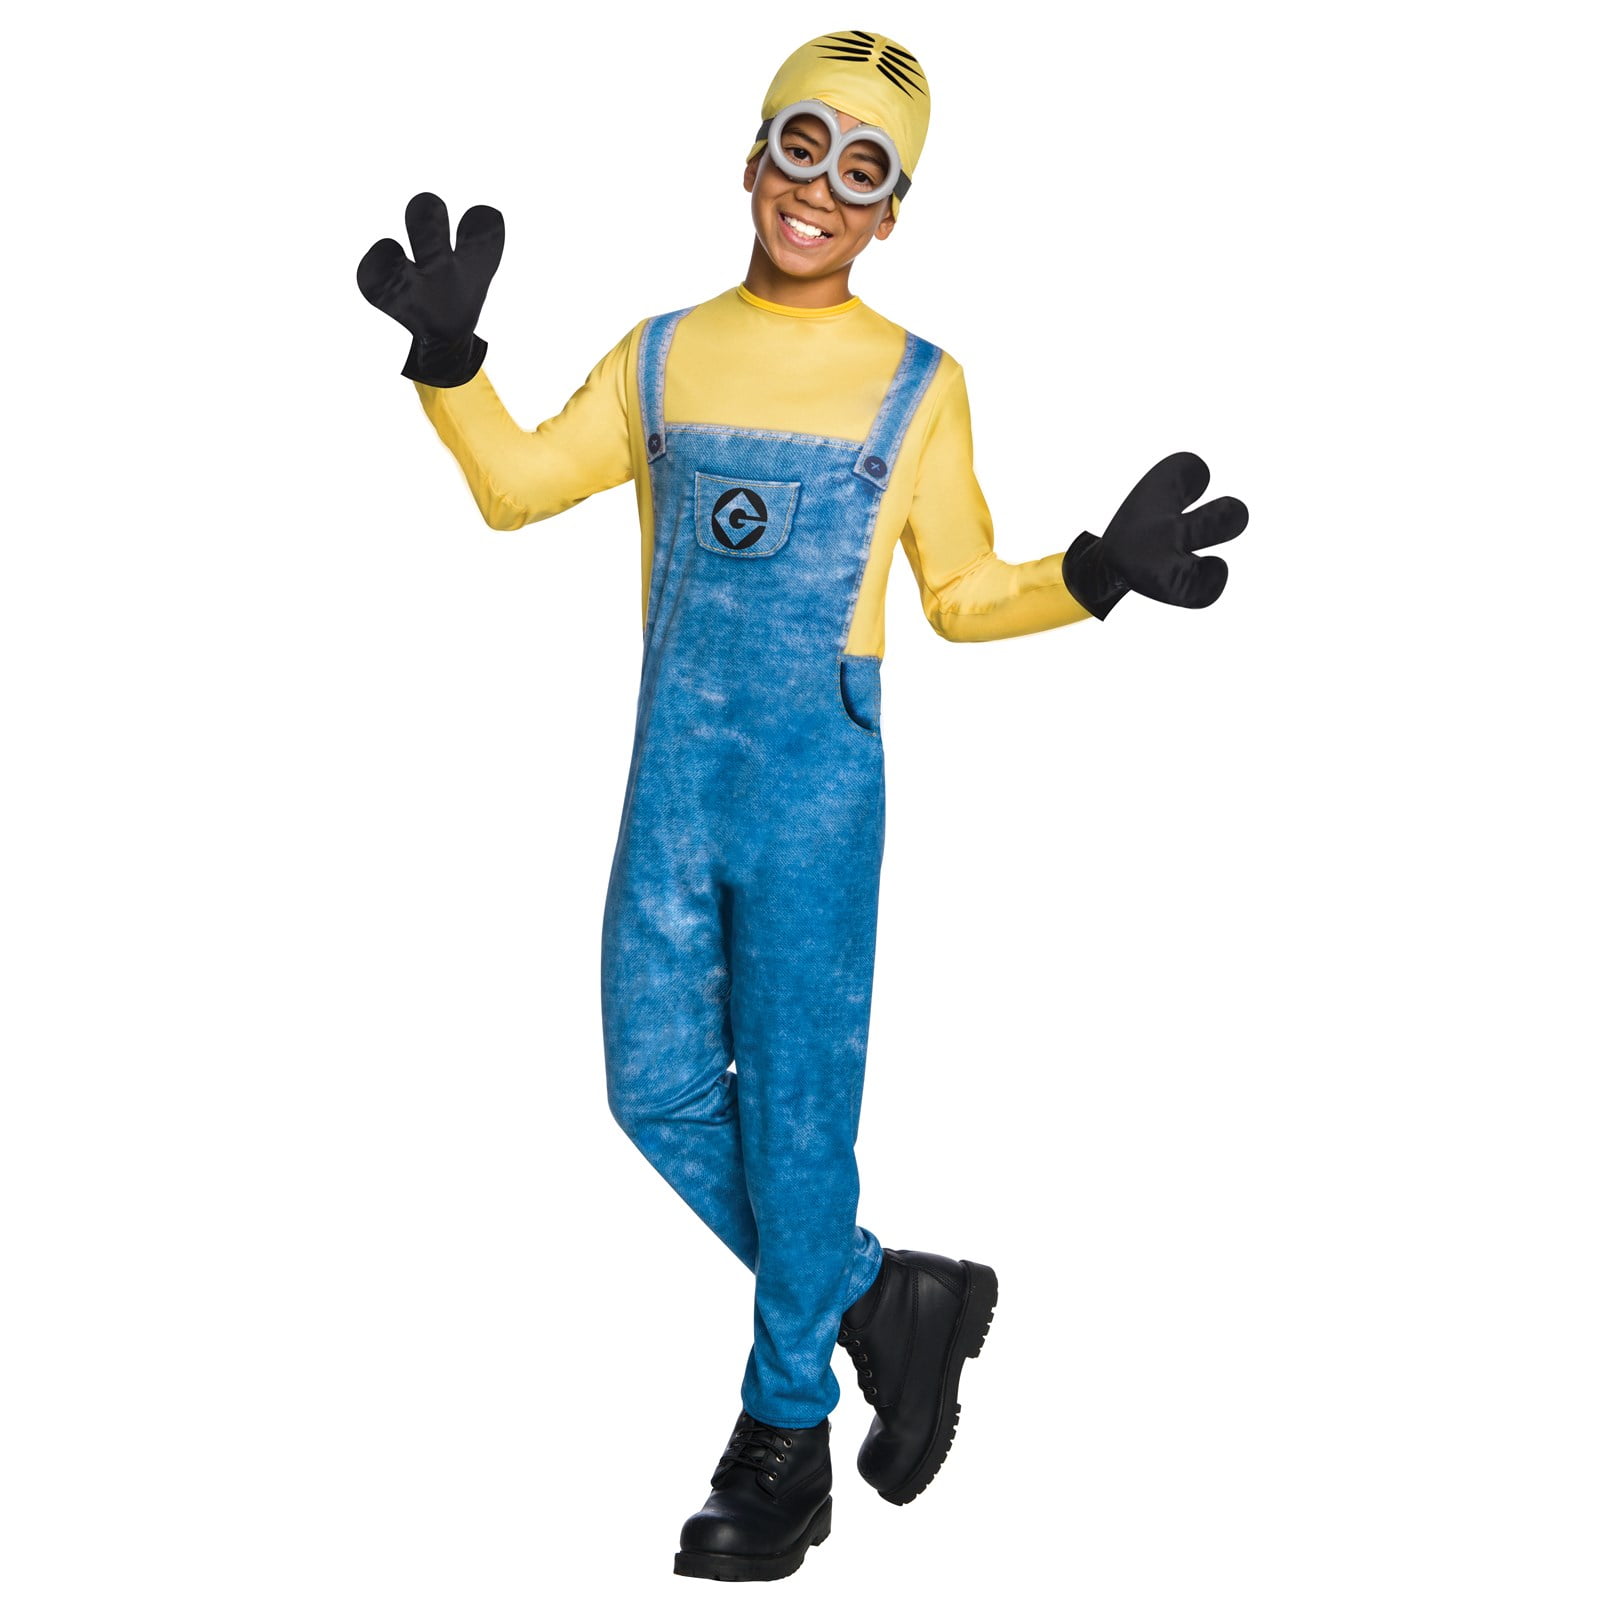 New Despicable Me Minion Minons Halloween Costume Child 2T or 3T or Medium  7-8